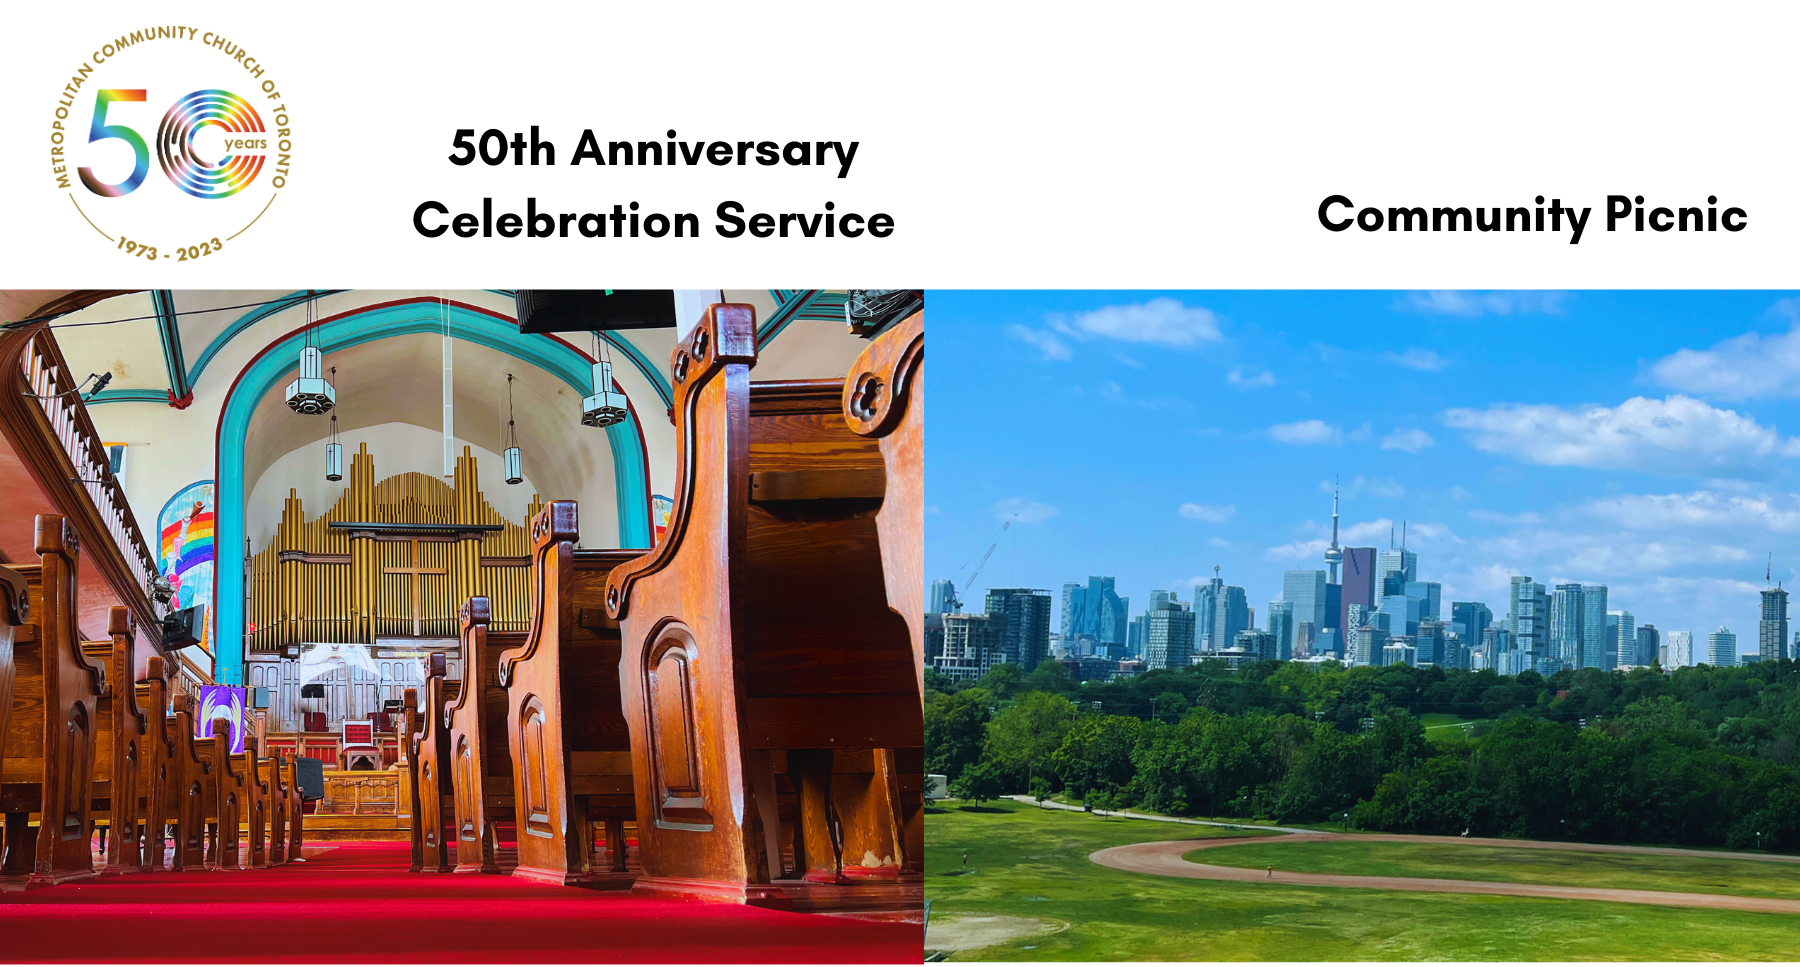 Picture of MCC Toronto's 50th anniversary on top left with the low-shot of Sanctuary of MCC Toronto and Picture of Riverdale park on the right and text saying 50th Anniversary Celebration Service and Community Picnic